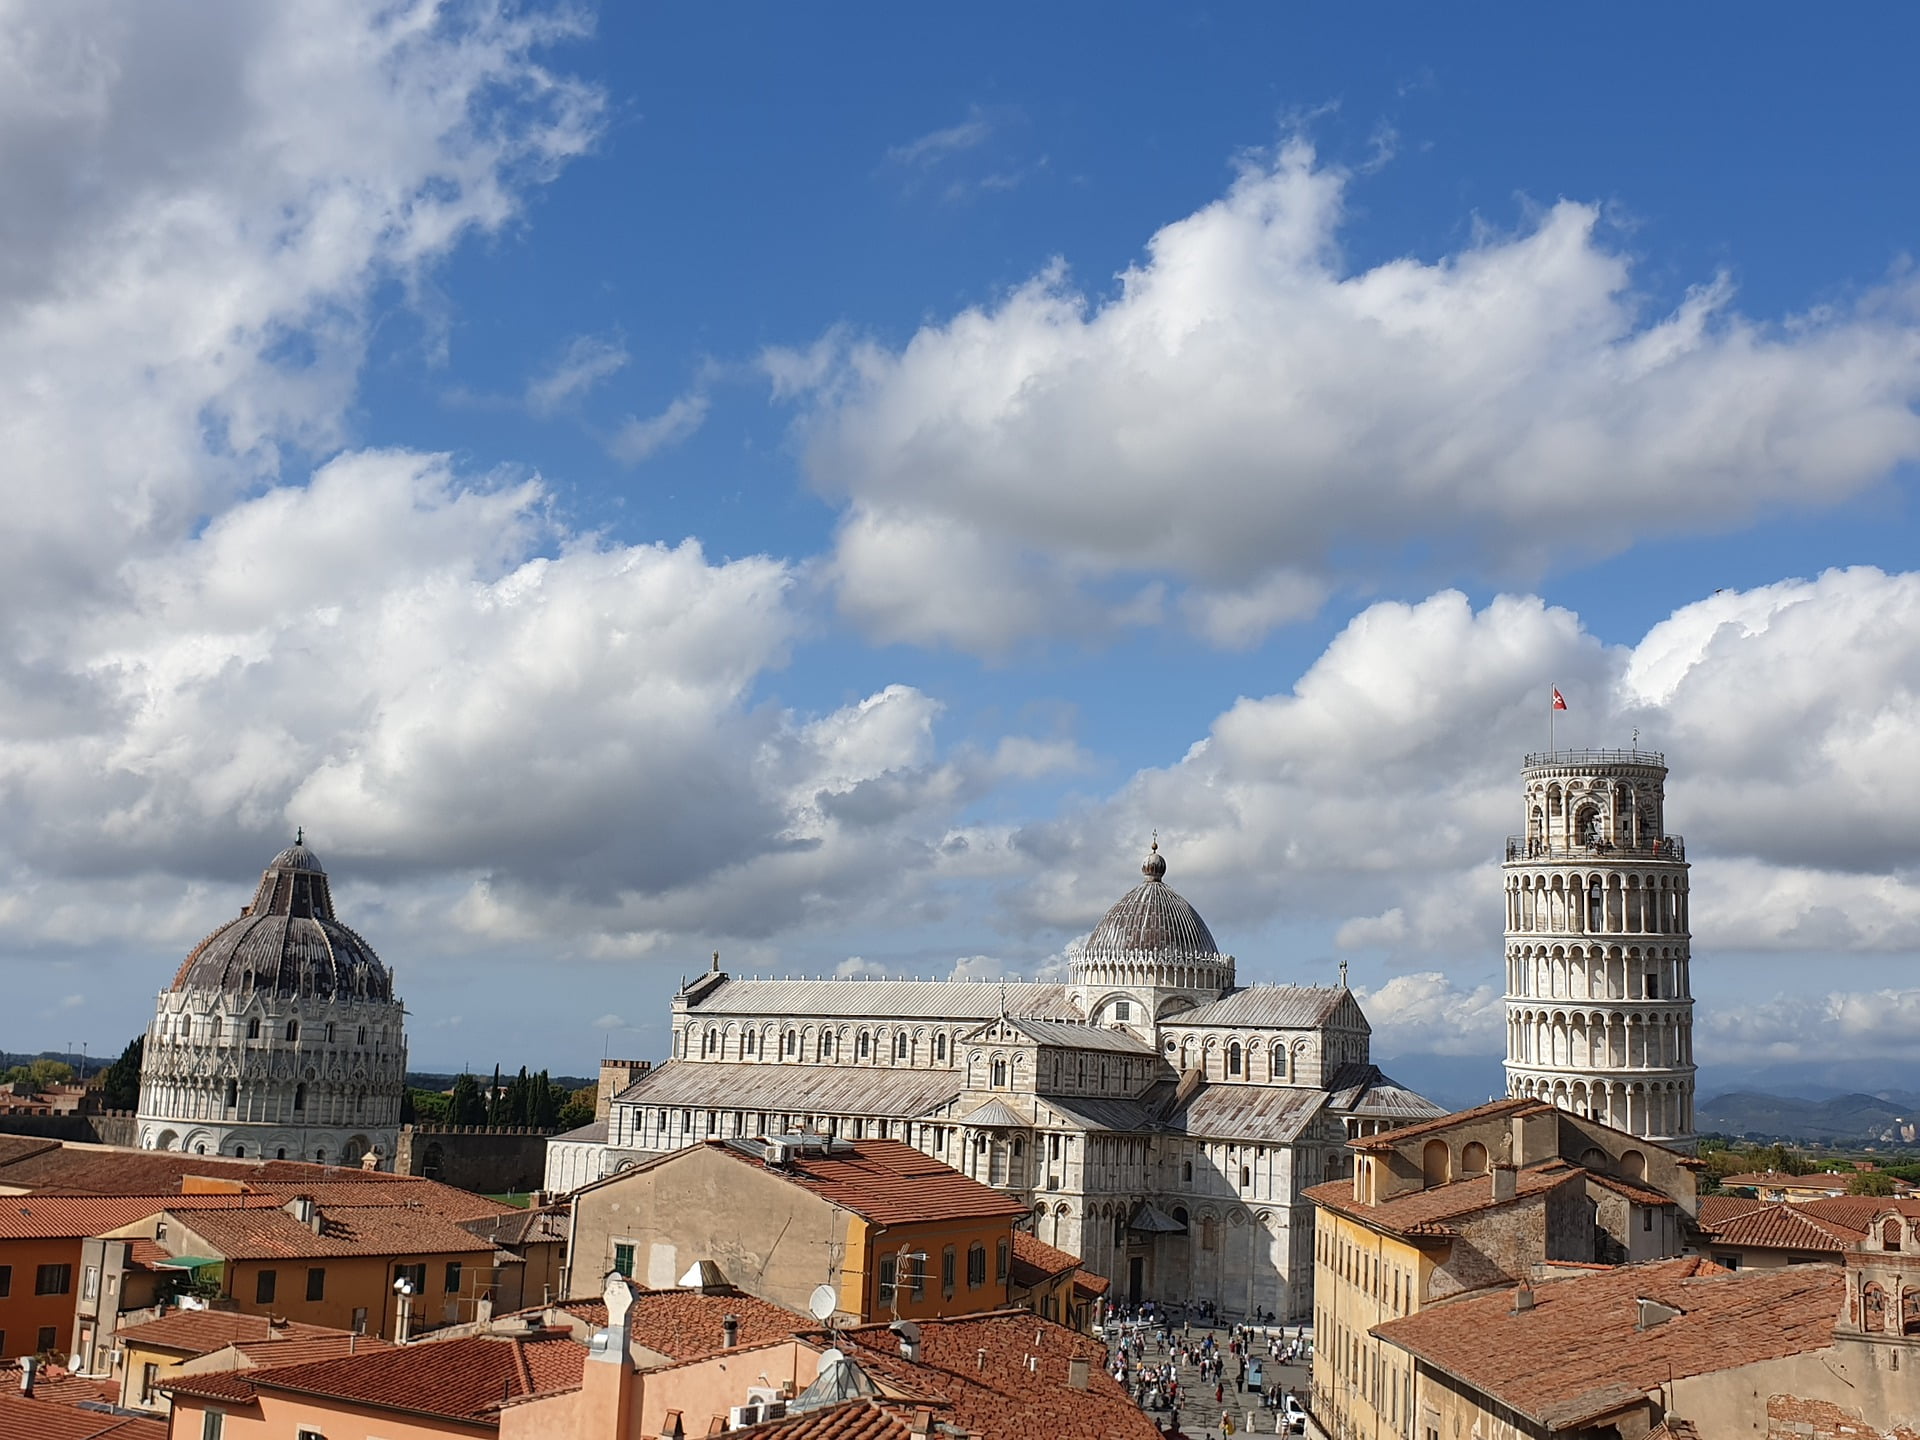 One day in Pisa